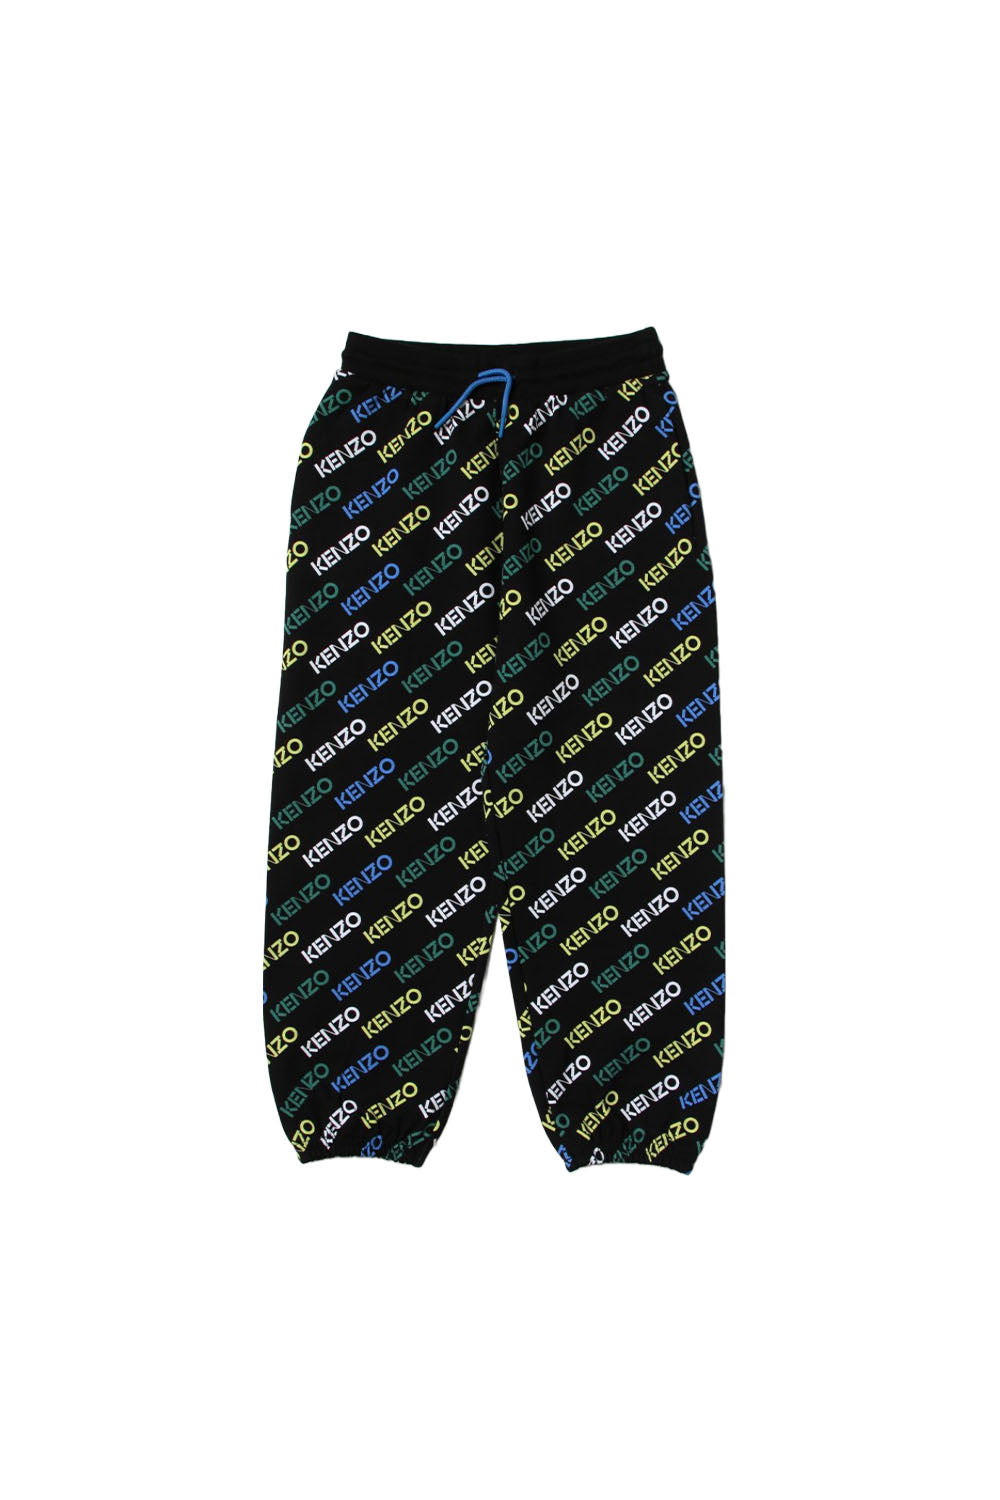 All-Over Print Interlock Joggers for Boys All-Over Print Interlock Joggers for Boys Maison7